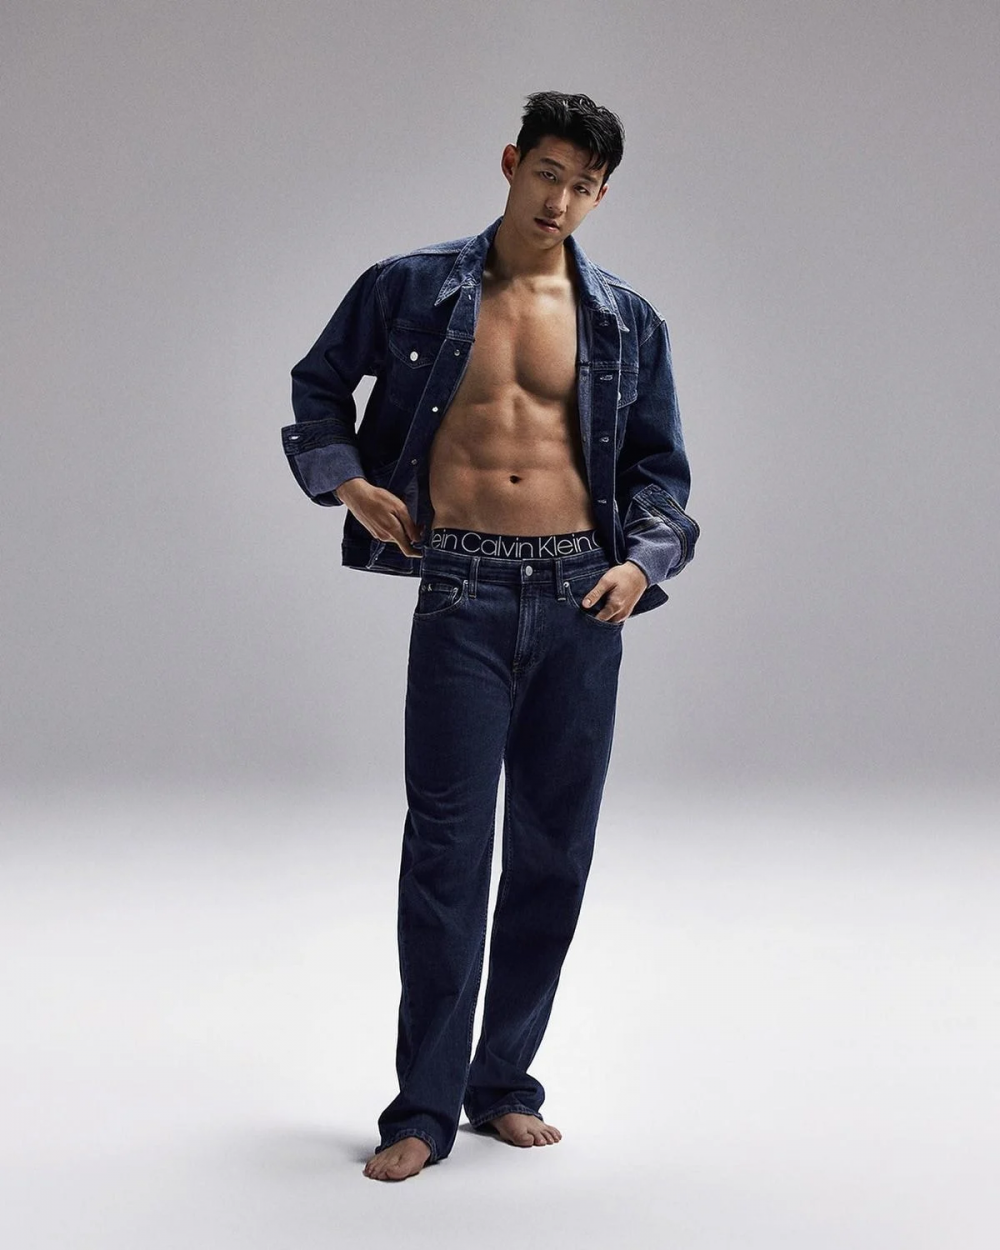 Introducing Son Heung-Min for Calvin Klein. Limited-edition